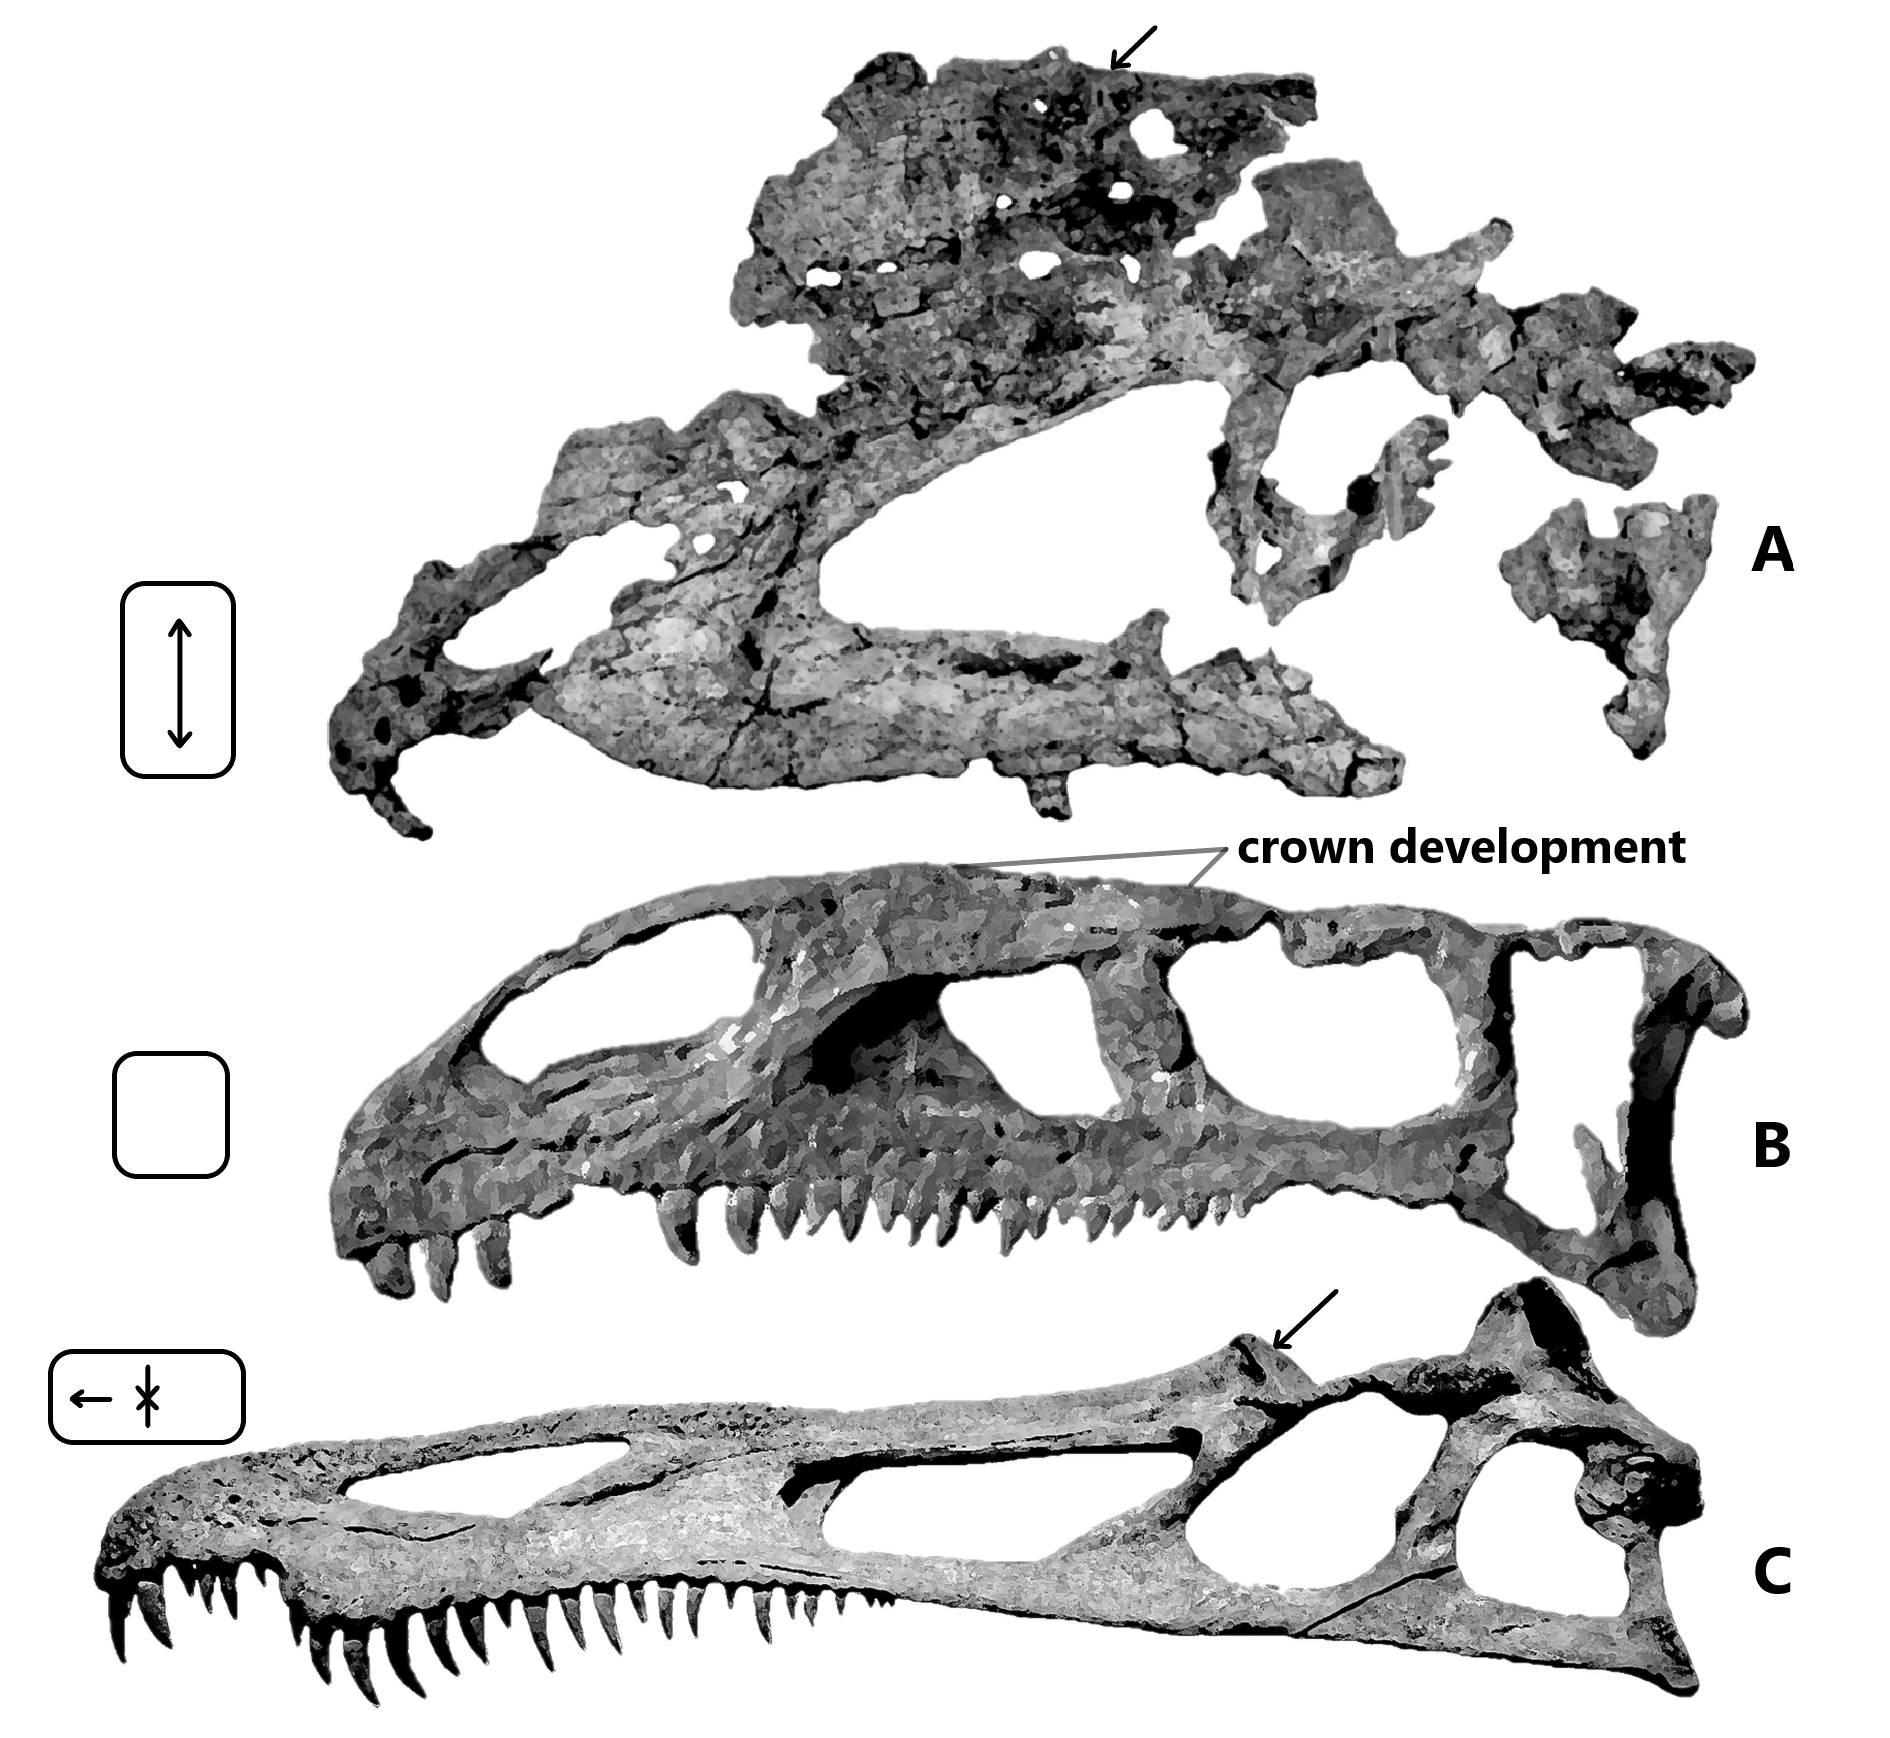 Comparison of various skull that recommended to group under Order Aliacollisauria. From top to bottom: A. Skull of Dilophosaurus wetherilli (UCMP 77270)[13]; B. Skull of Plateosaurus trossingensis (NAAG_00011238)[14]; and C. Reconstructed skull (cast) of Suchomimus tenerensis (MNN GDF 500)[15].